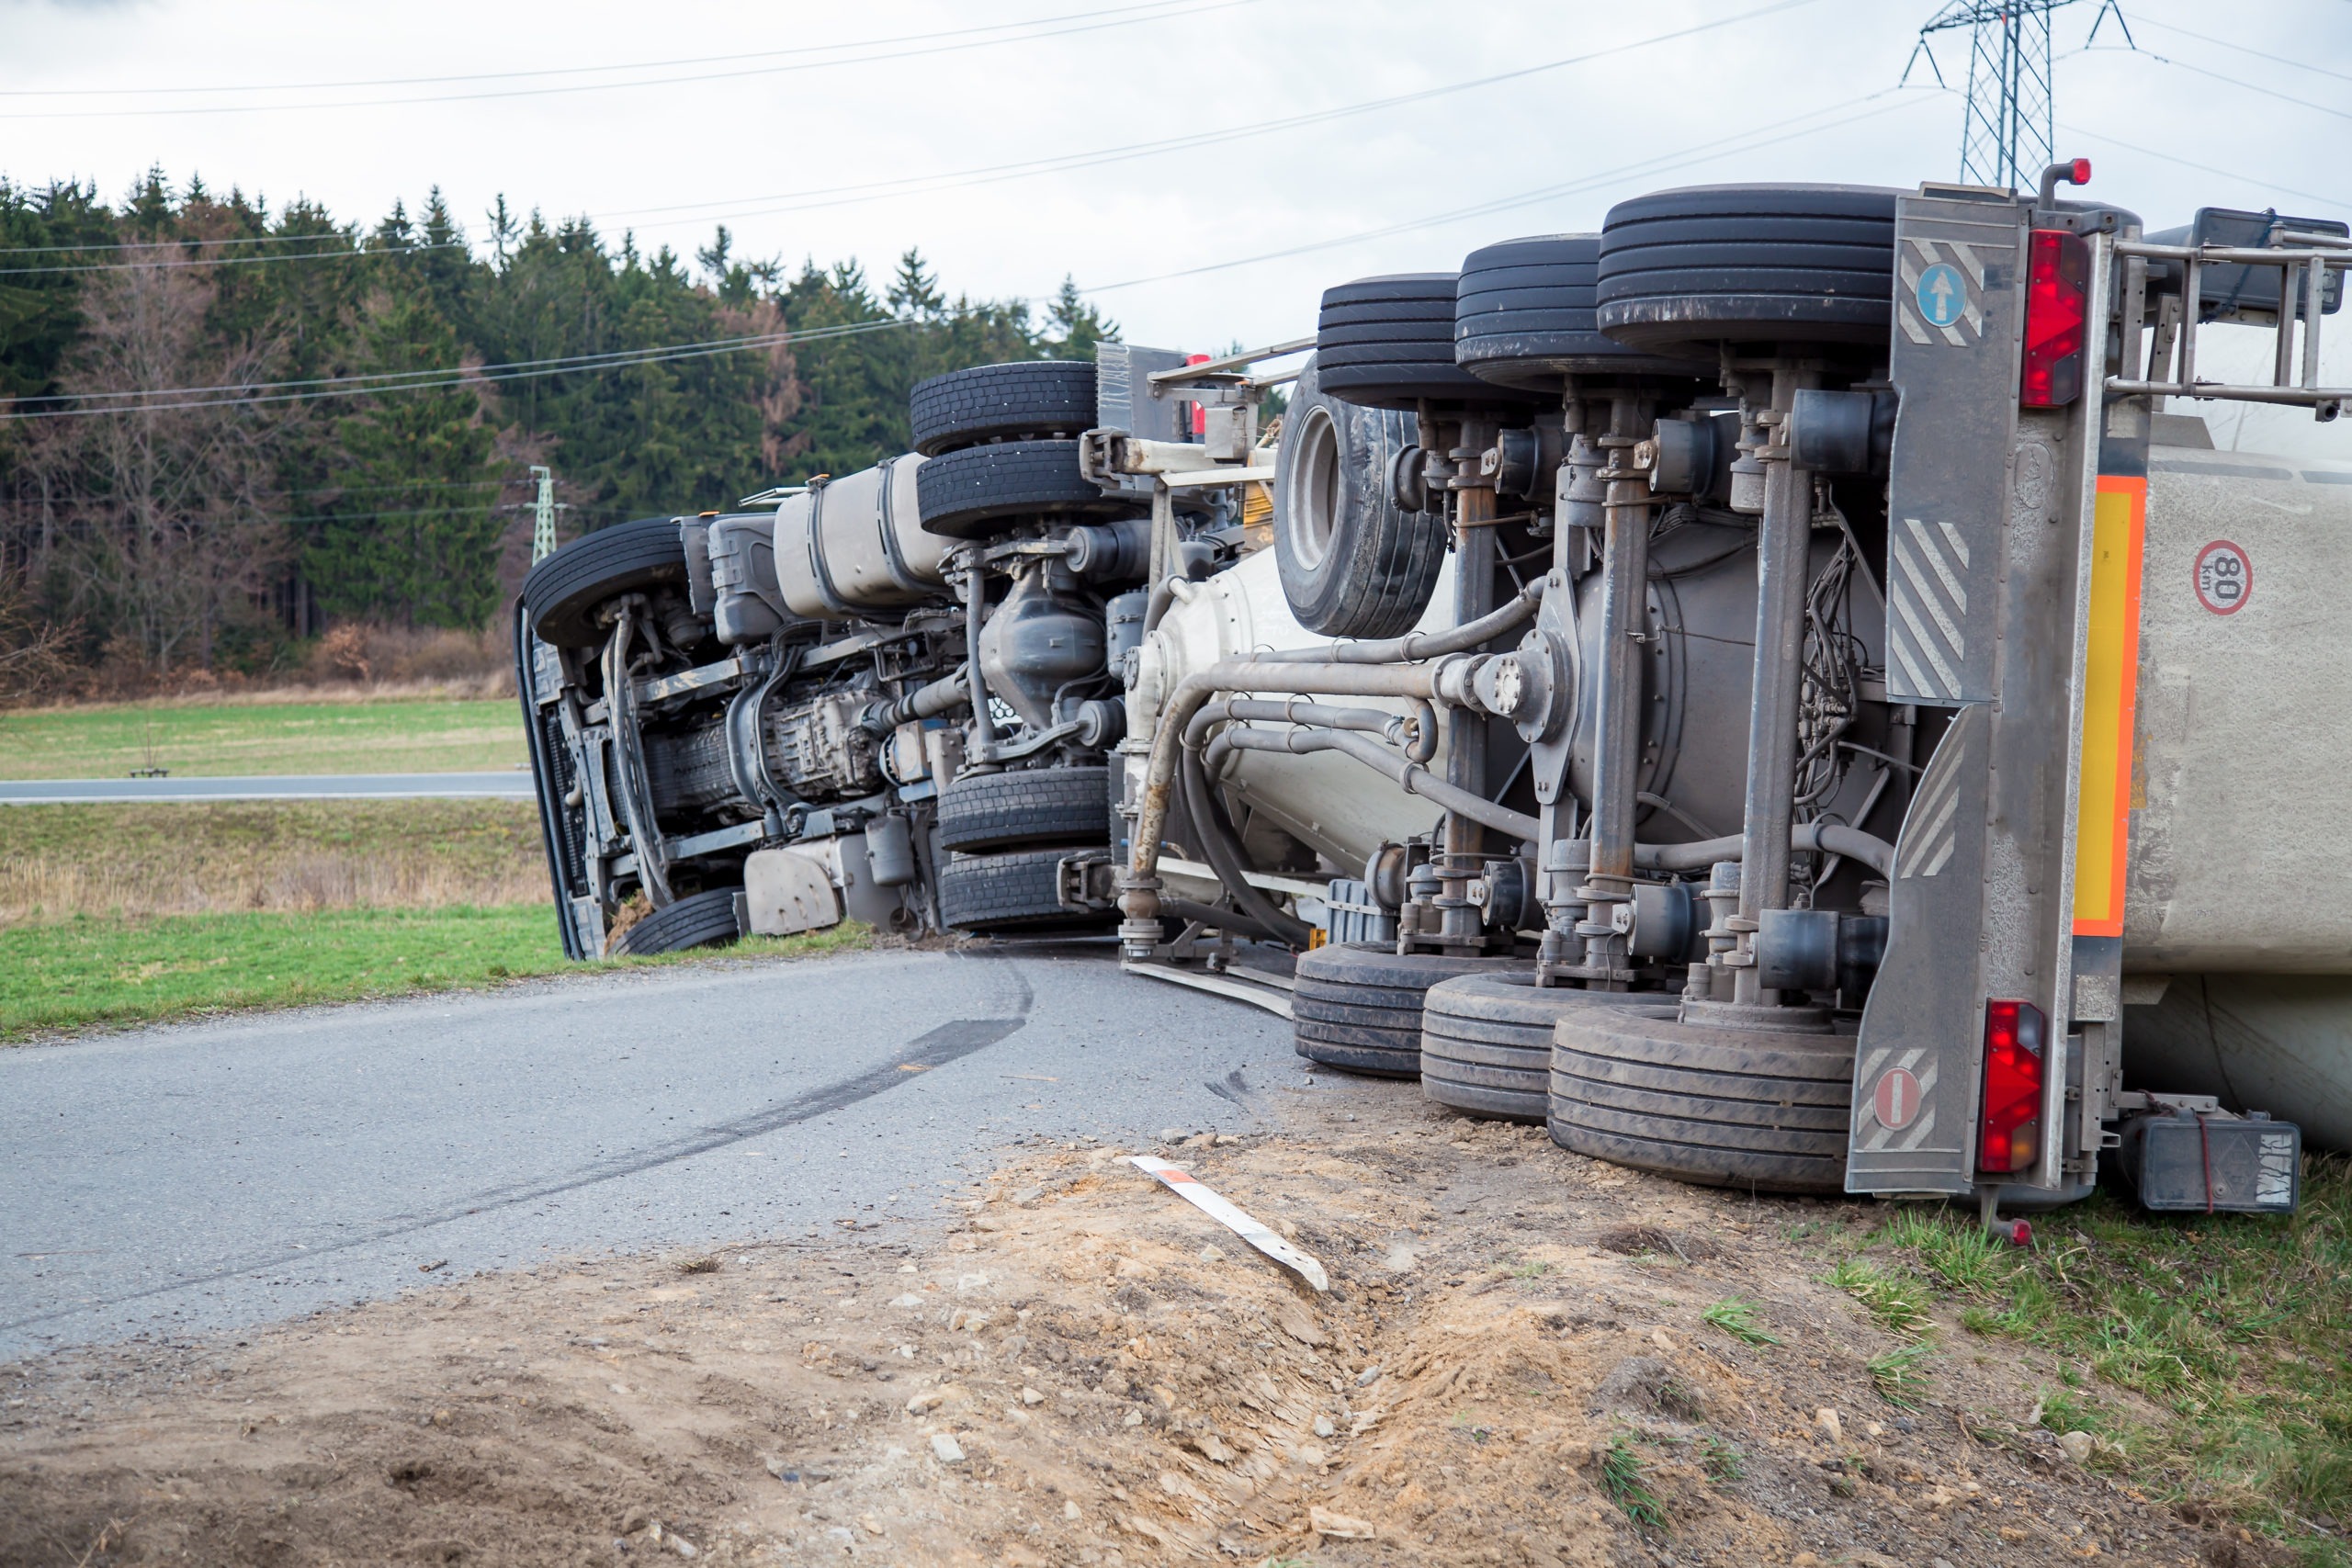 How Long do I Have to File an Insurance Claim for a Truck Accident in Texas?